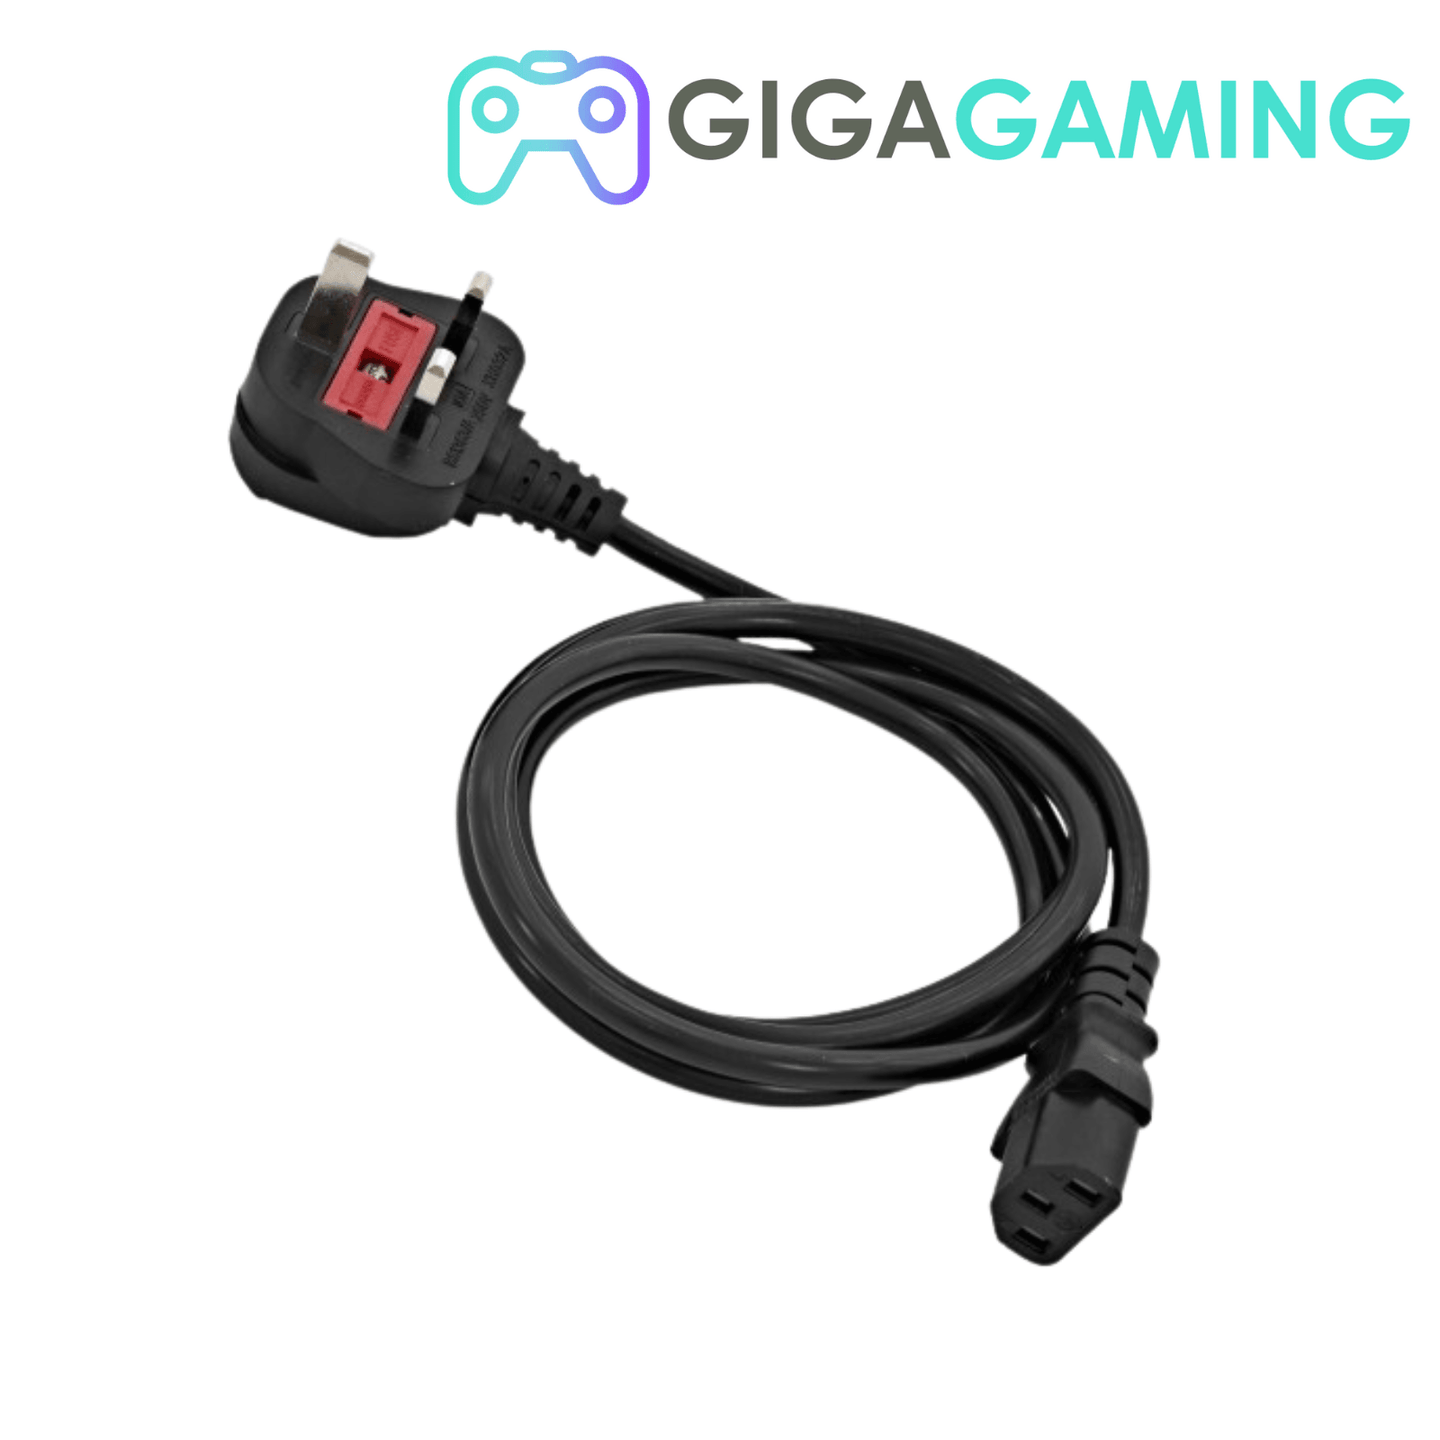 IEC Kettle Lead Power Cable 3 Pin UK Plug For PC Monitor TV